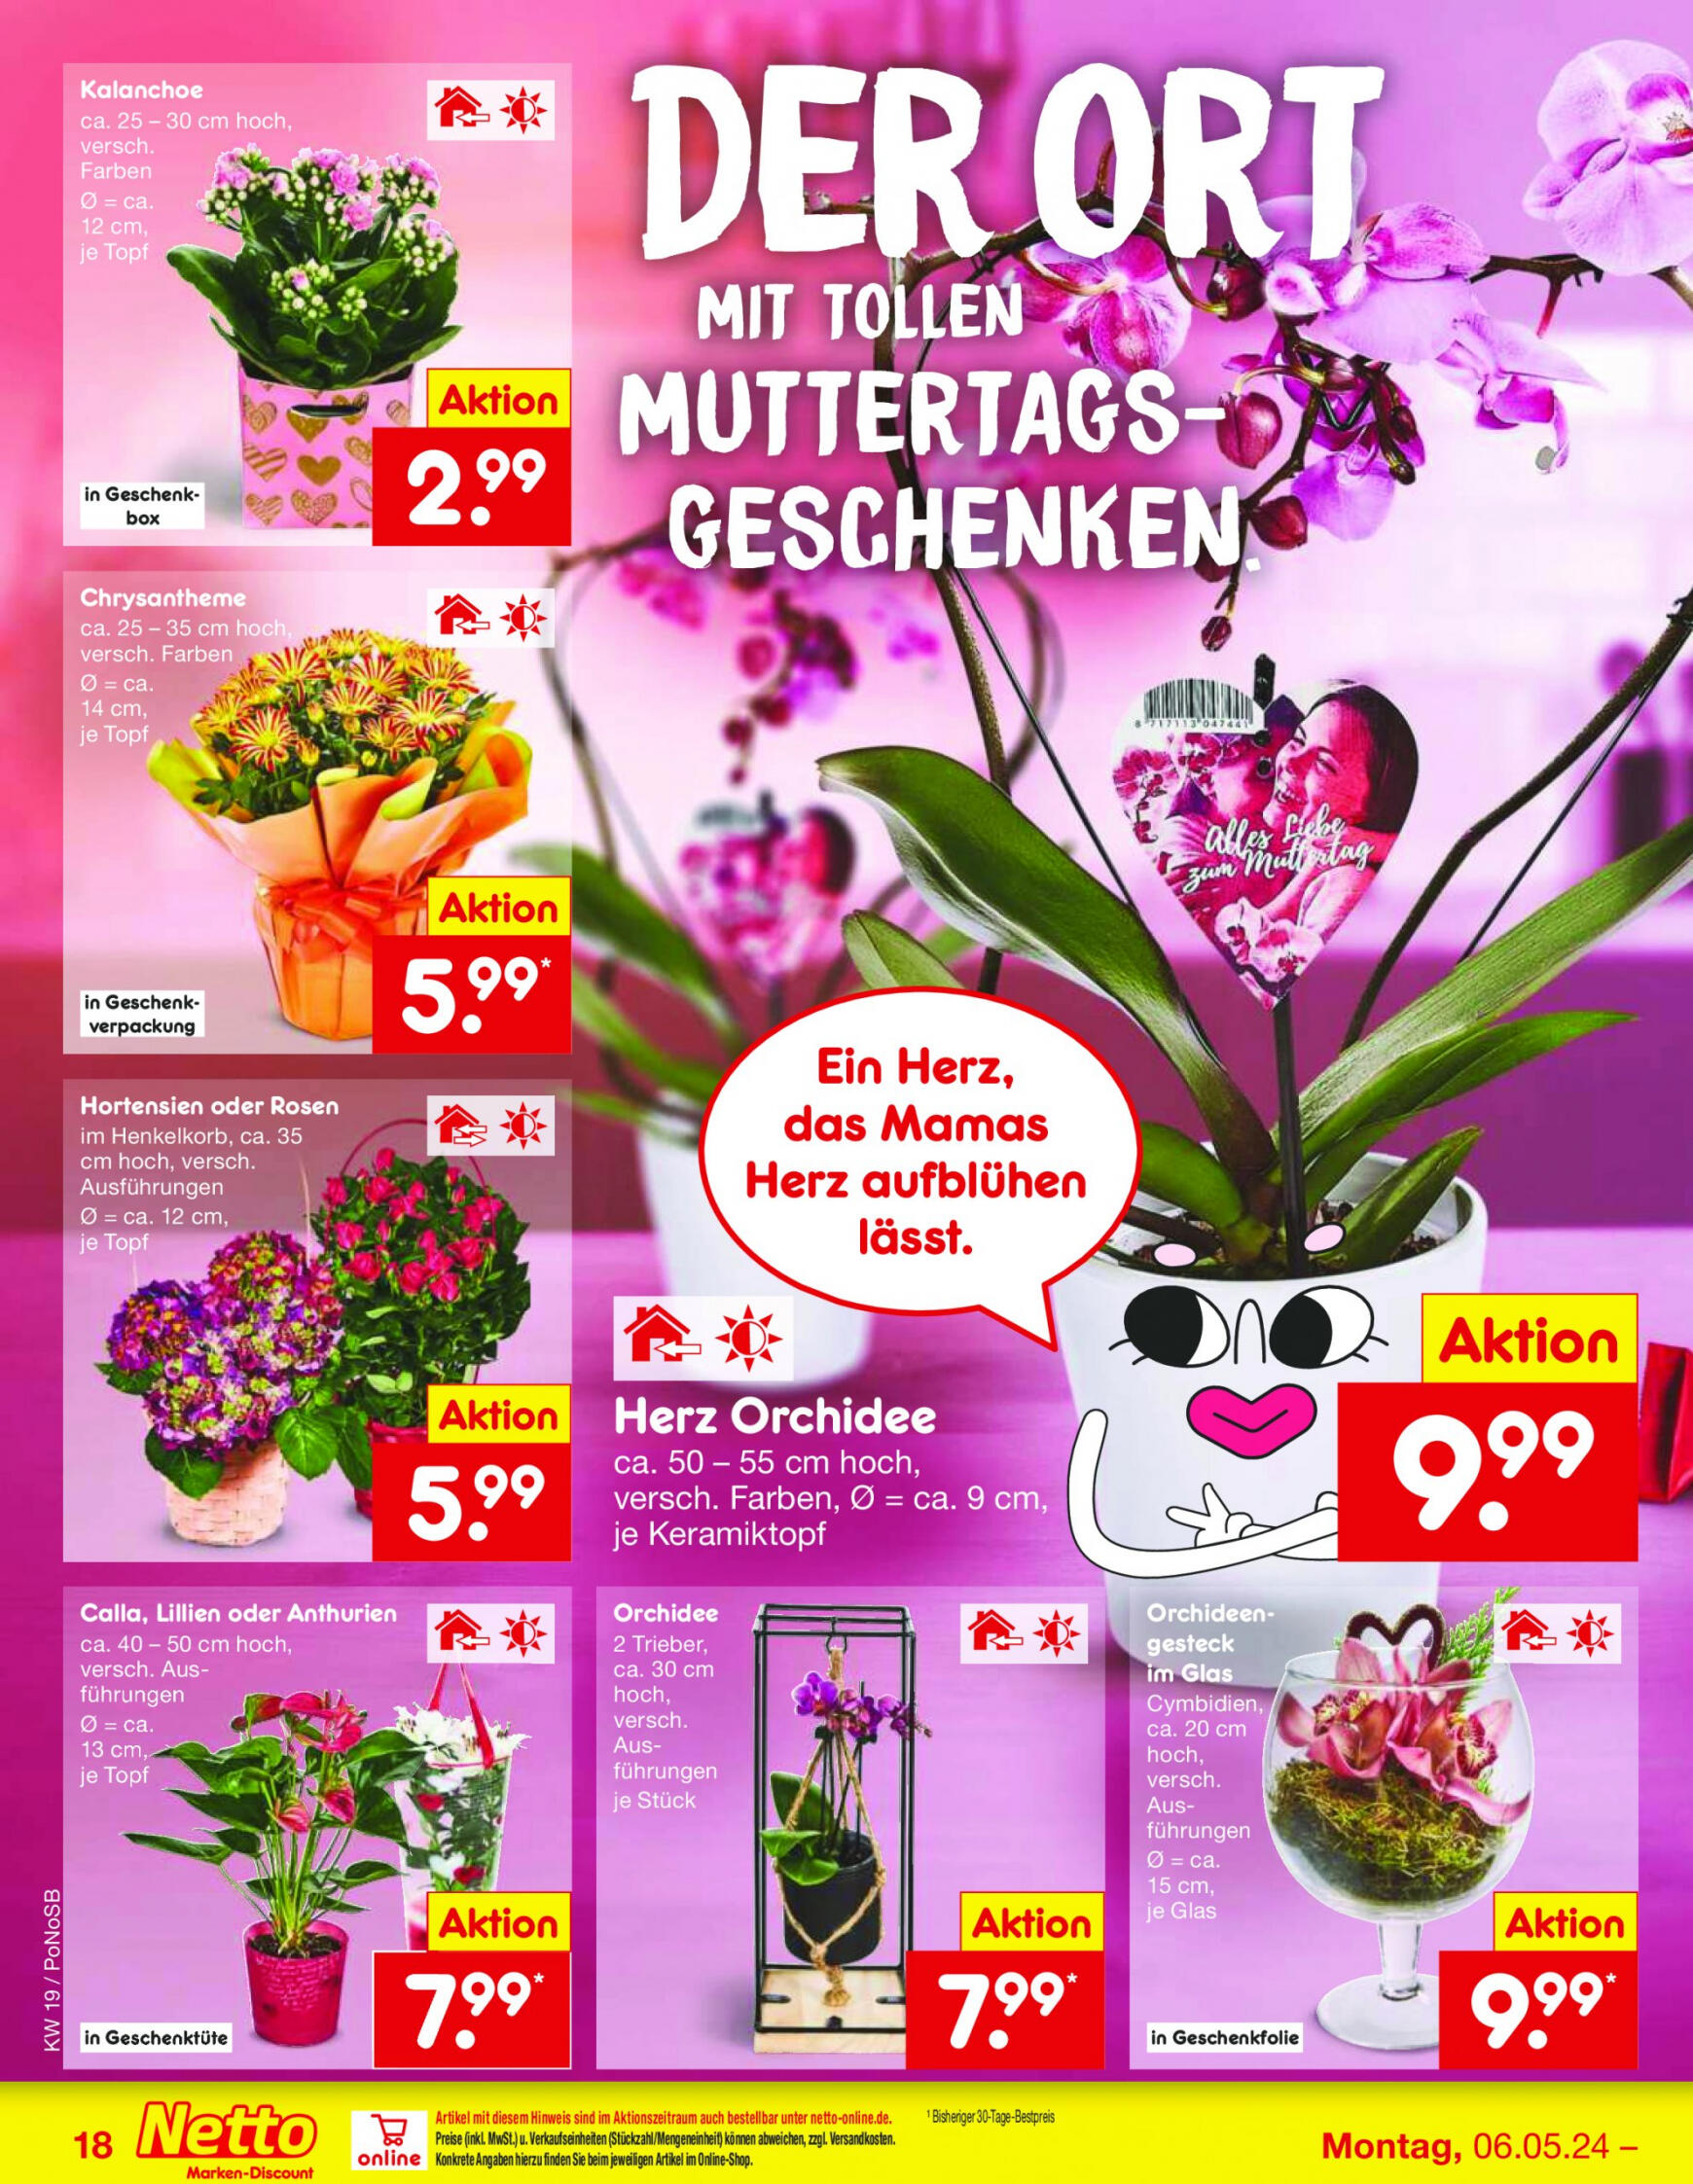 netto - Flyer Netto aktuell 06.05. - 11.05. - page: 26